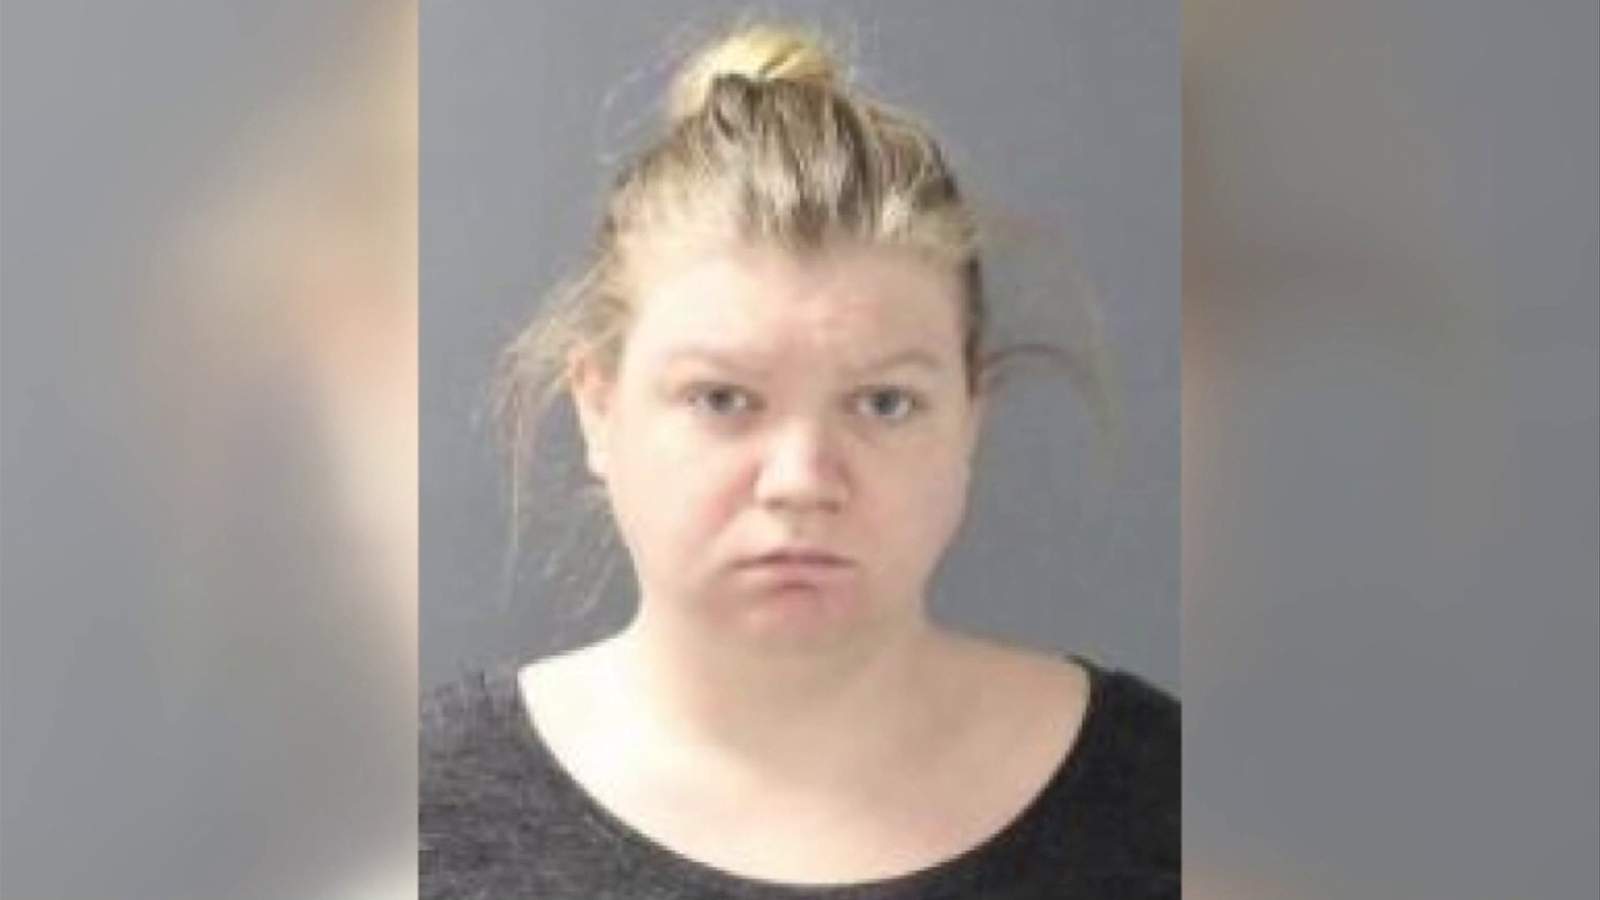 Court date set for Christiansburg mother charged with making child porn, sexually assaulting her son